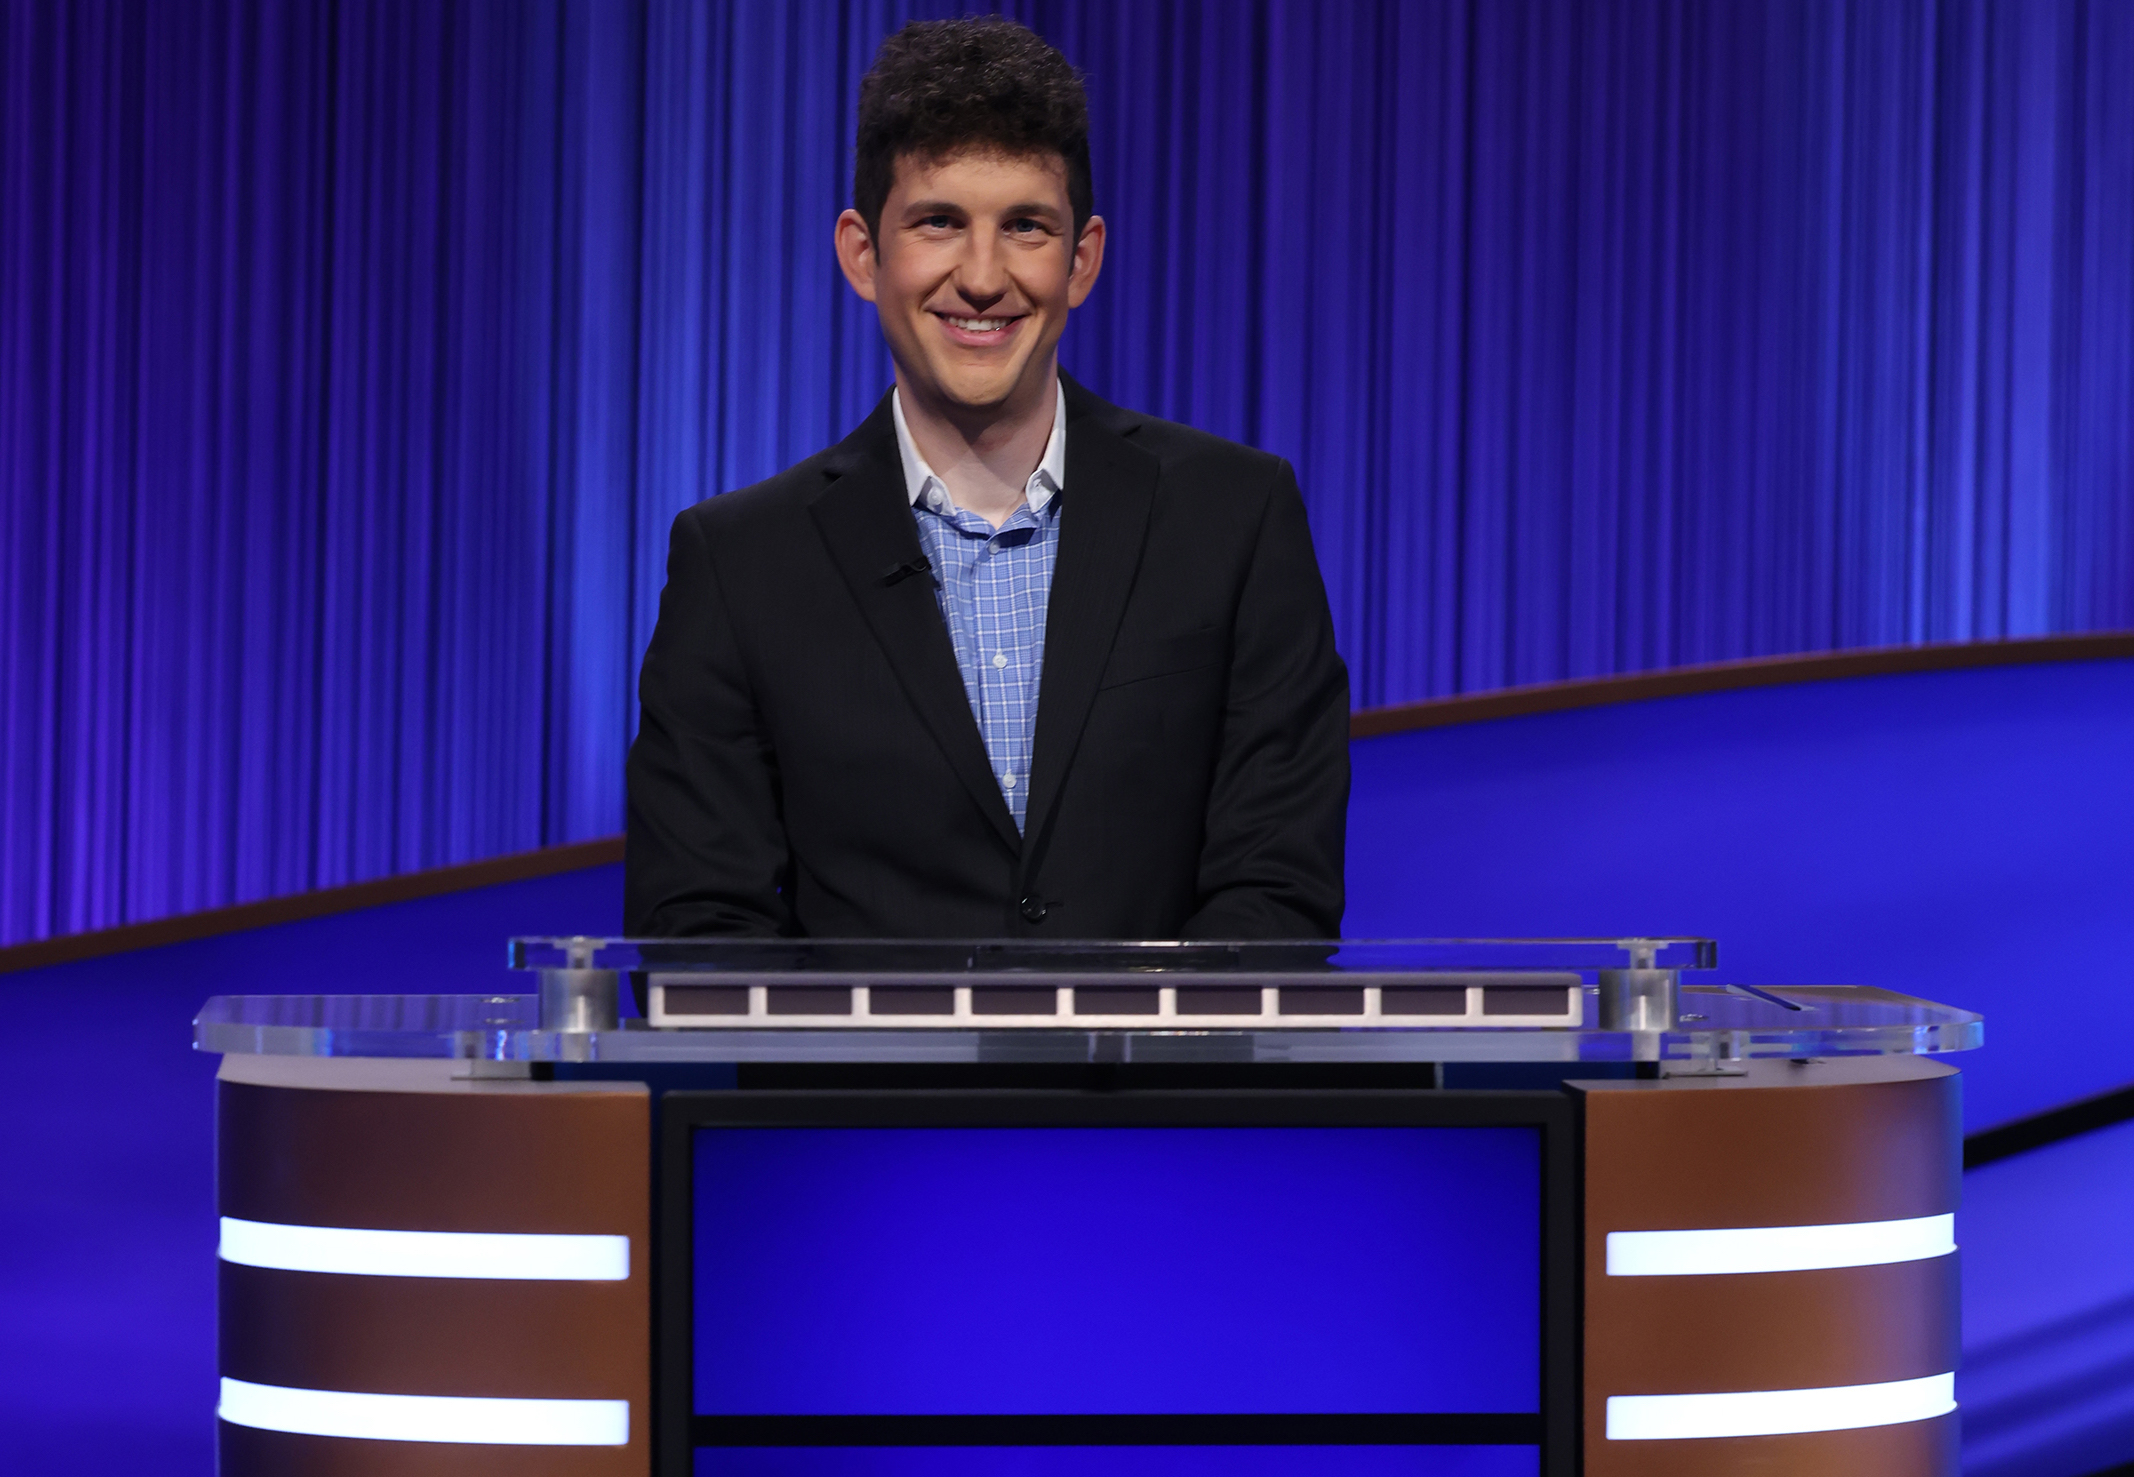 Mike Richards Fired as Executive Producer of Jeopardy! and Wheel